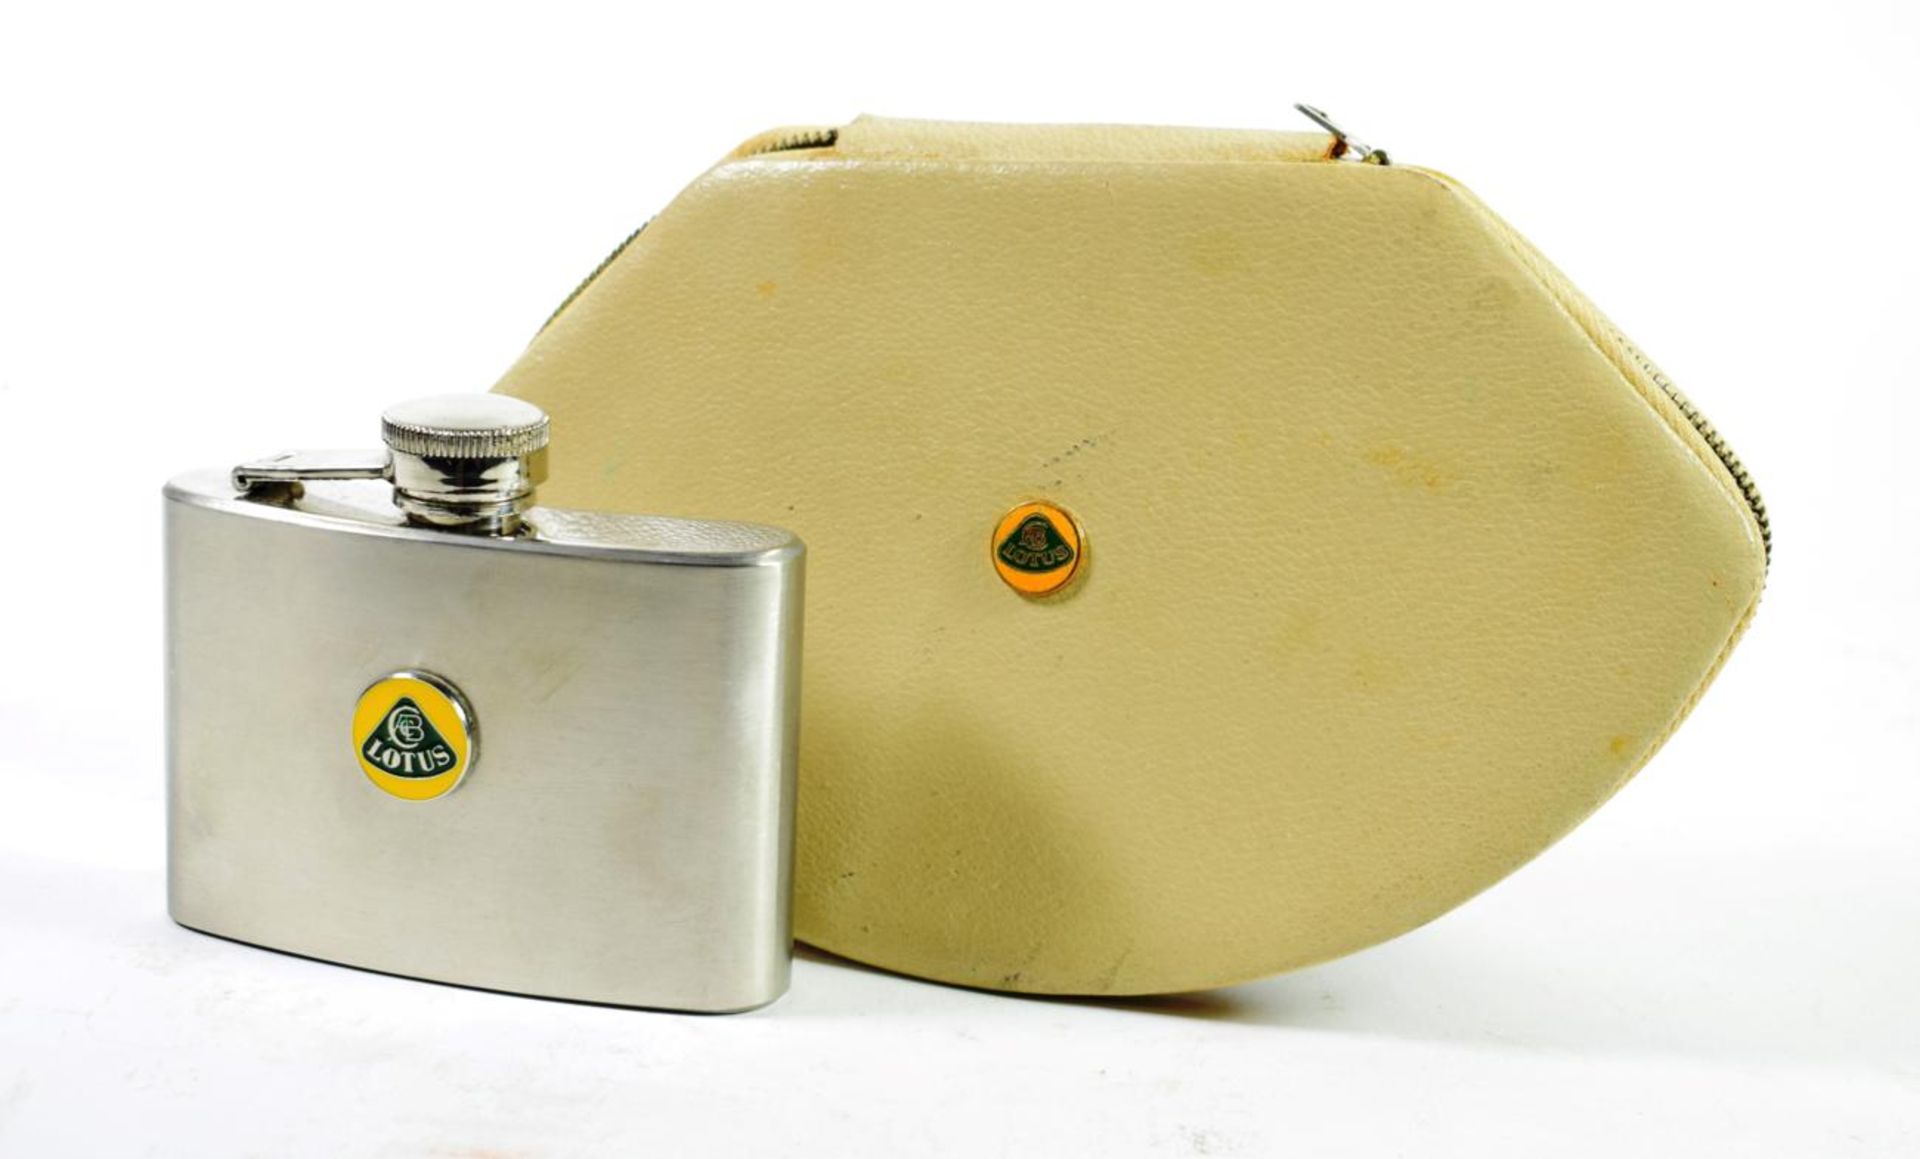 Lotus Interest: A 1950/60 Accessory Cream Leather Manicure Set; and A 1970's Stainless Steel 4oz